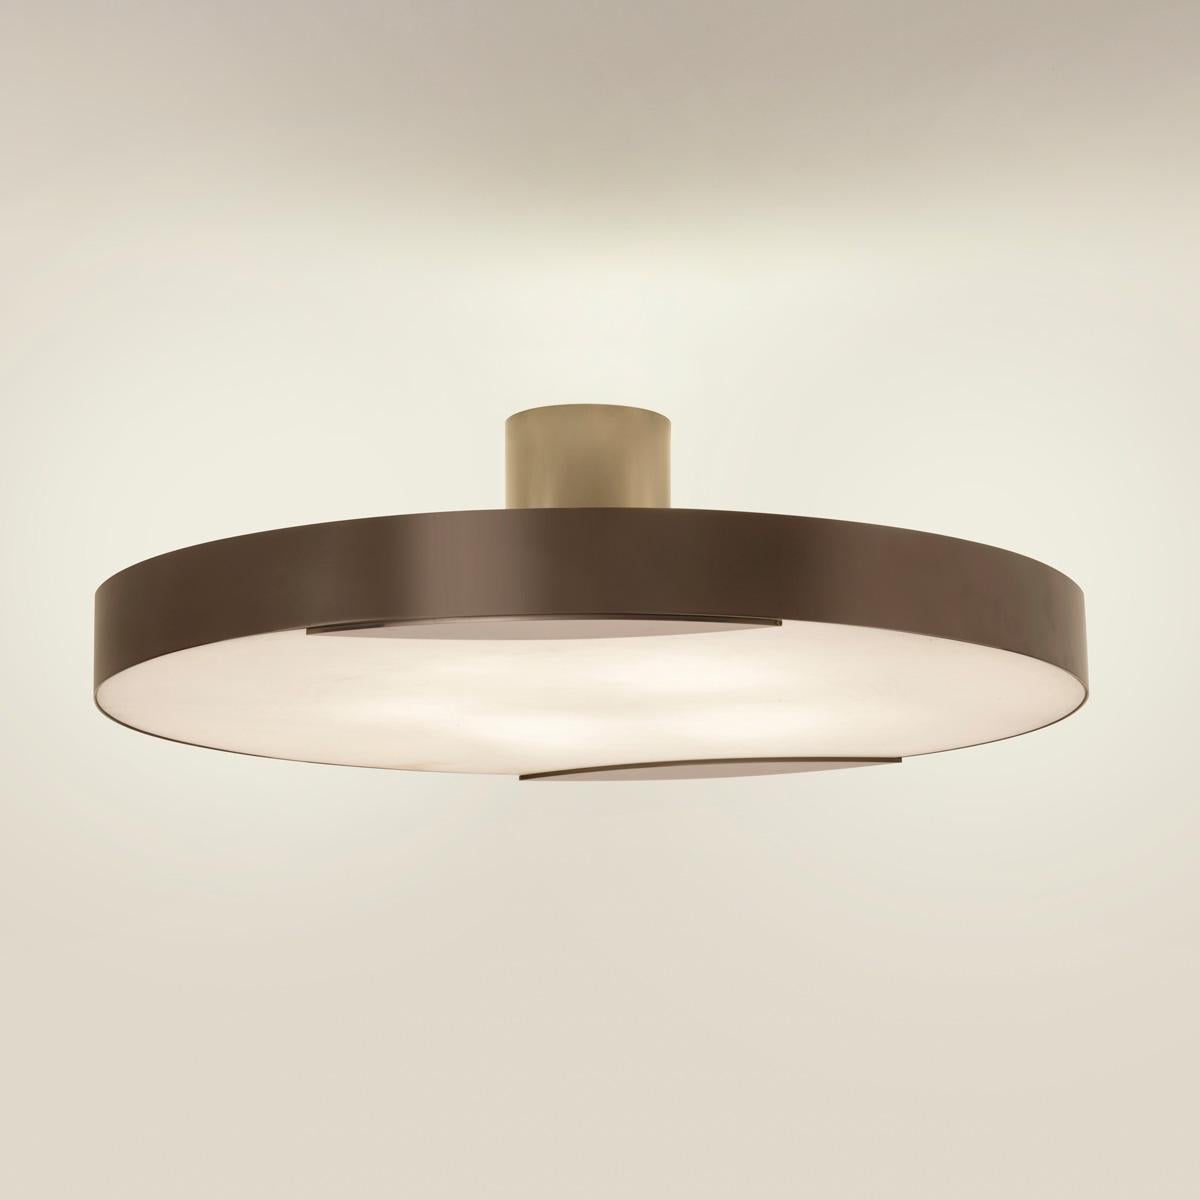 Modern Cloud N.1 Ceiling Light by Gaspare Asaro-Peltro Finish For Sale